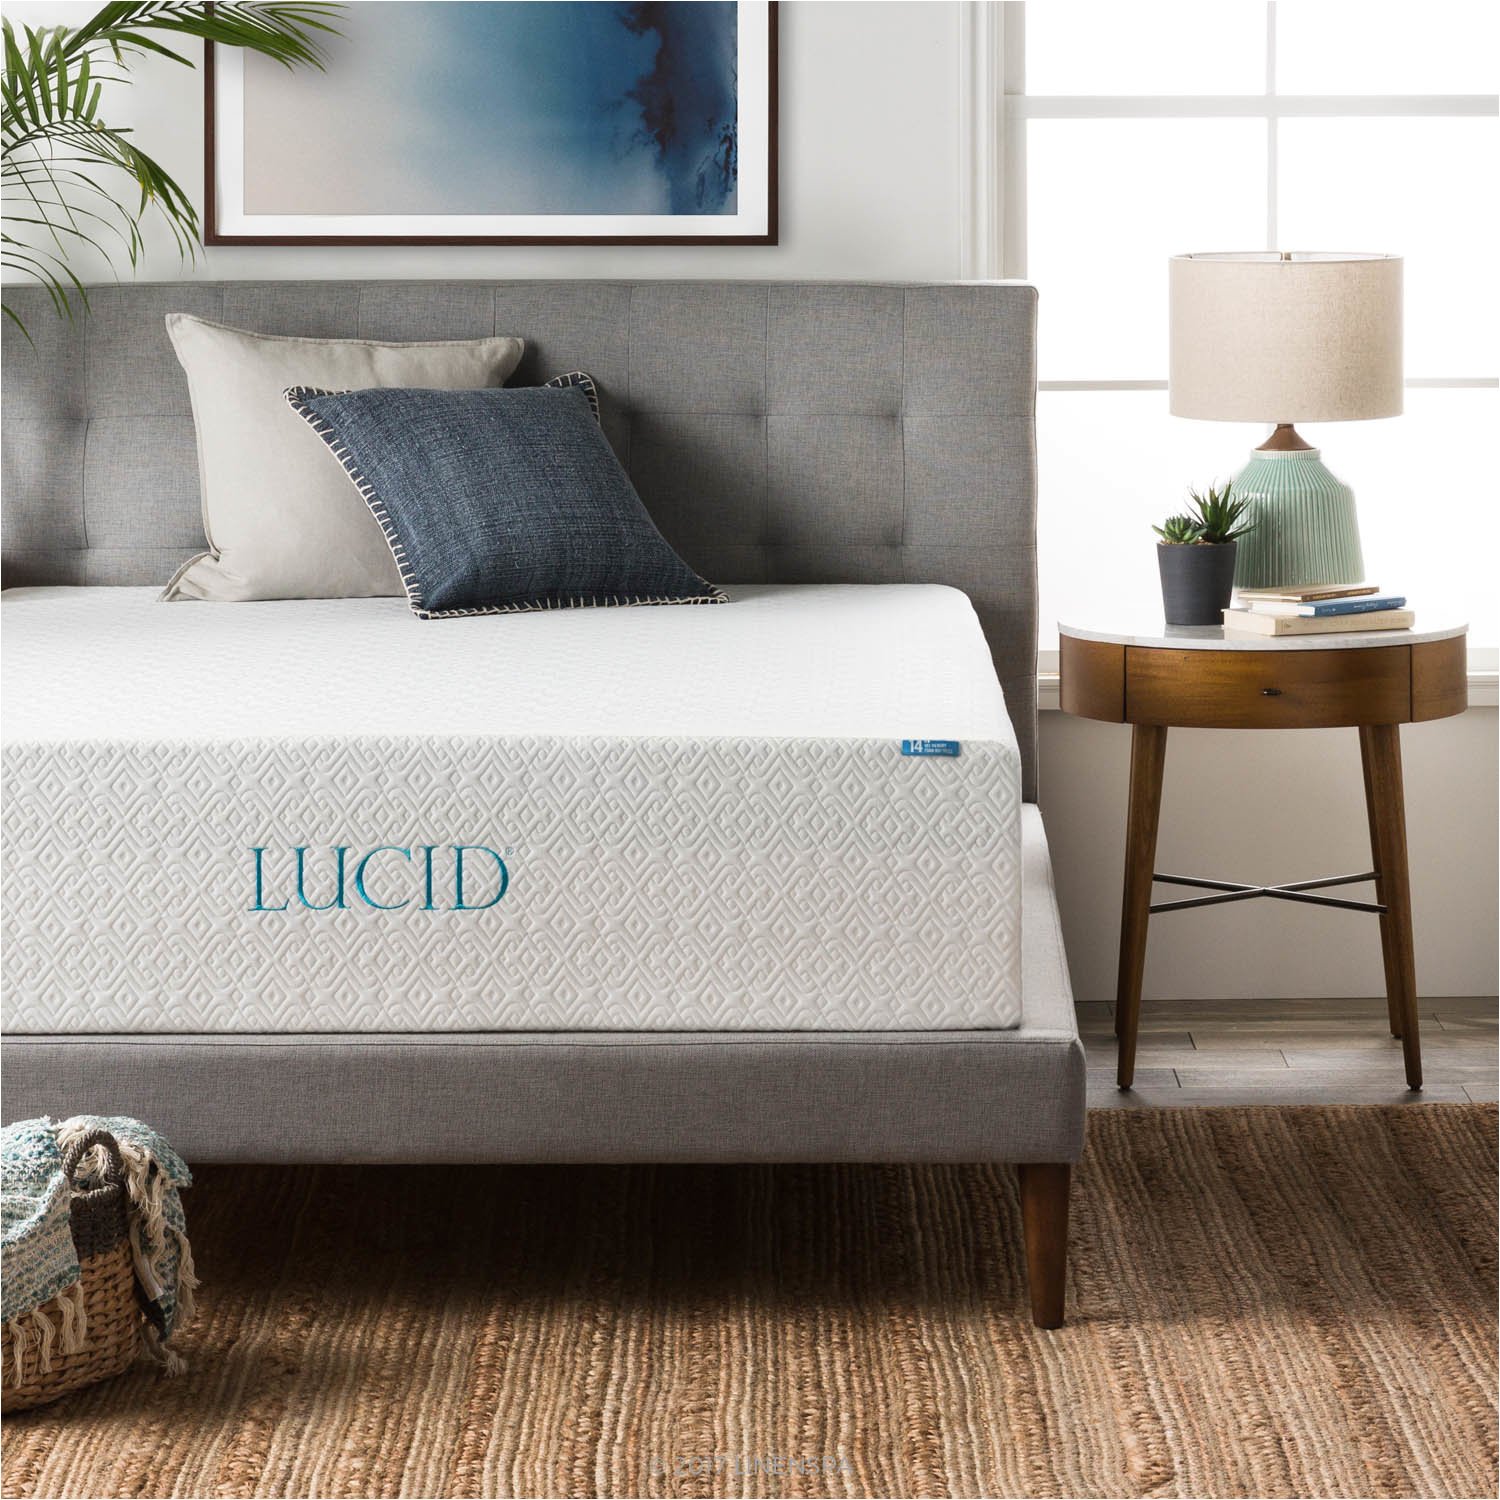 How Much Does A Full Size Memory Foam Mattress Weigh Lucid 14 Plush ...